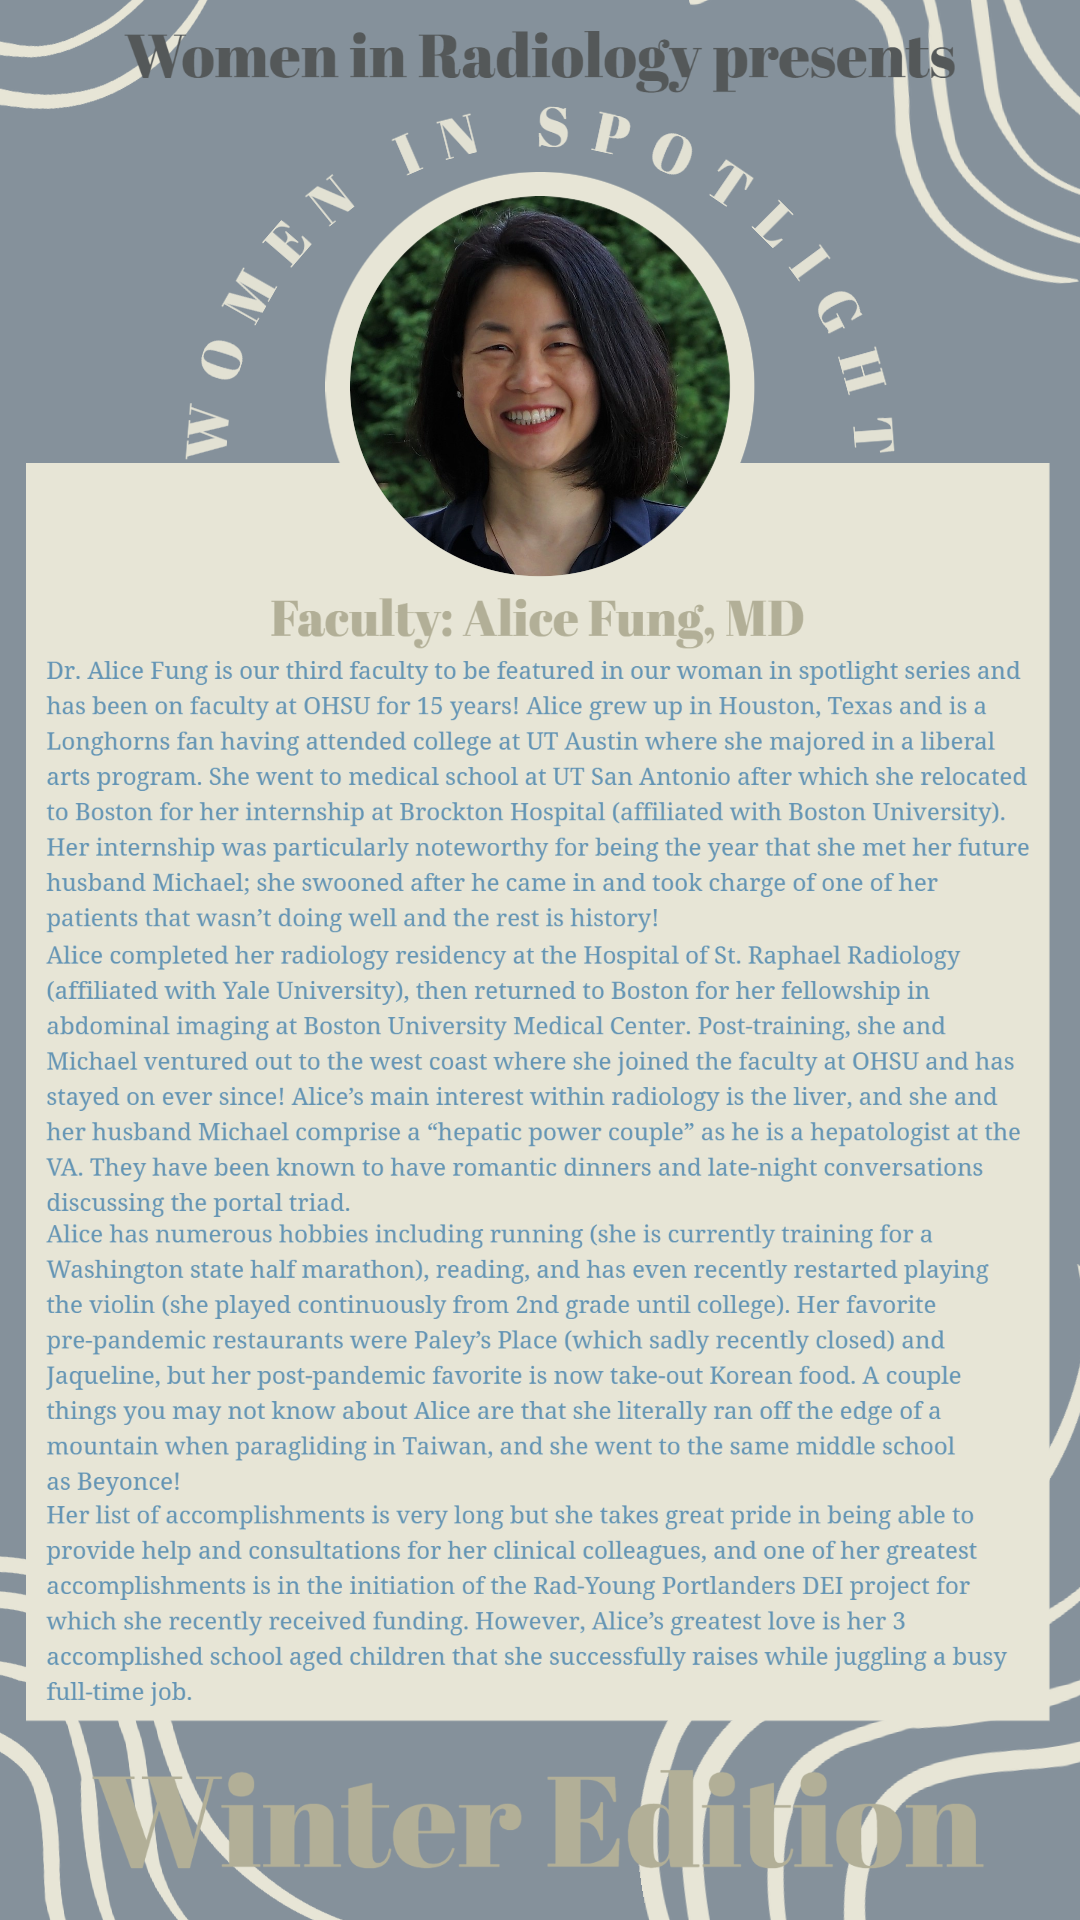 Picture and Bio of Dr. Alice Fung: Dr. Alice Fung is our third faculty to be featured in our woman in spotlight series and has been on faculty at OHSU for 15 years! Alice grew up in Houston, Texas and is a Longhorns fan having attended college at UT Austin where she majored in a liberal arts program.  She went to medical school at UT San Antonio after which she relocated to Boston for her internship at Brockton Hospital (affiliated with Boston University). Her internship was particularly noteworthy for bein